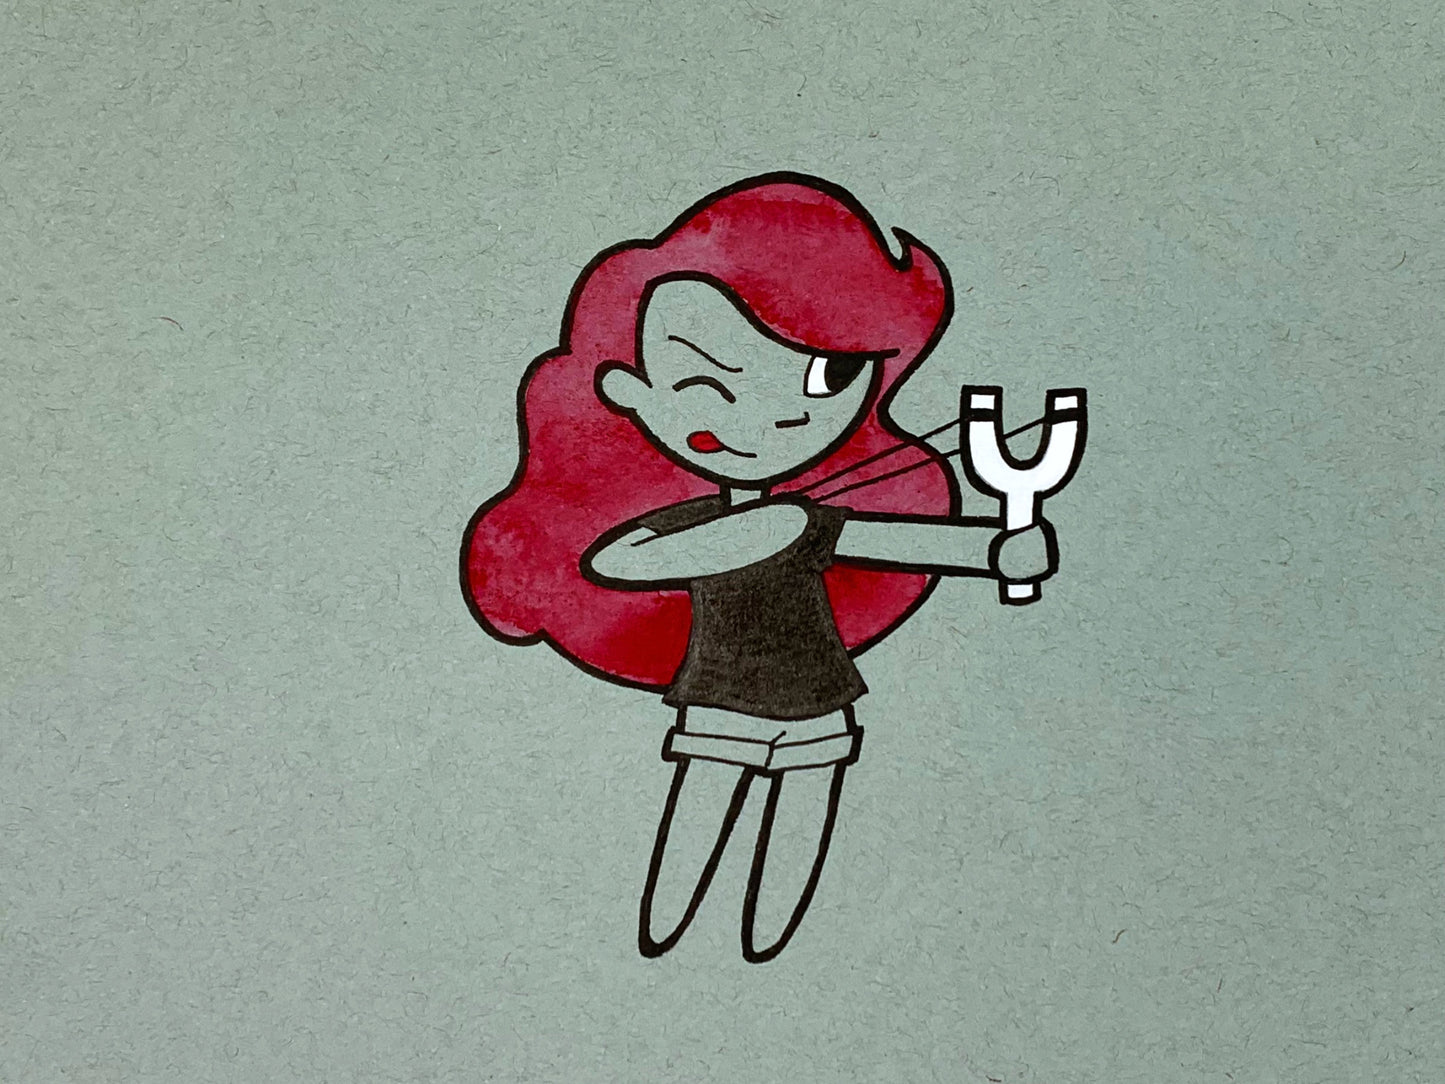 Original illustration of a red headed girl sticking her tongue out while she aims with her slingshot. Made using ink, watercolor, and gouache.